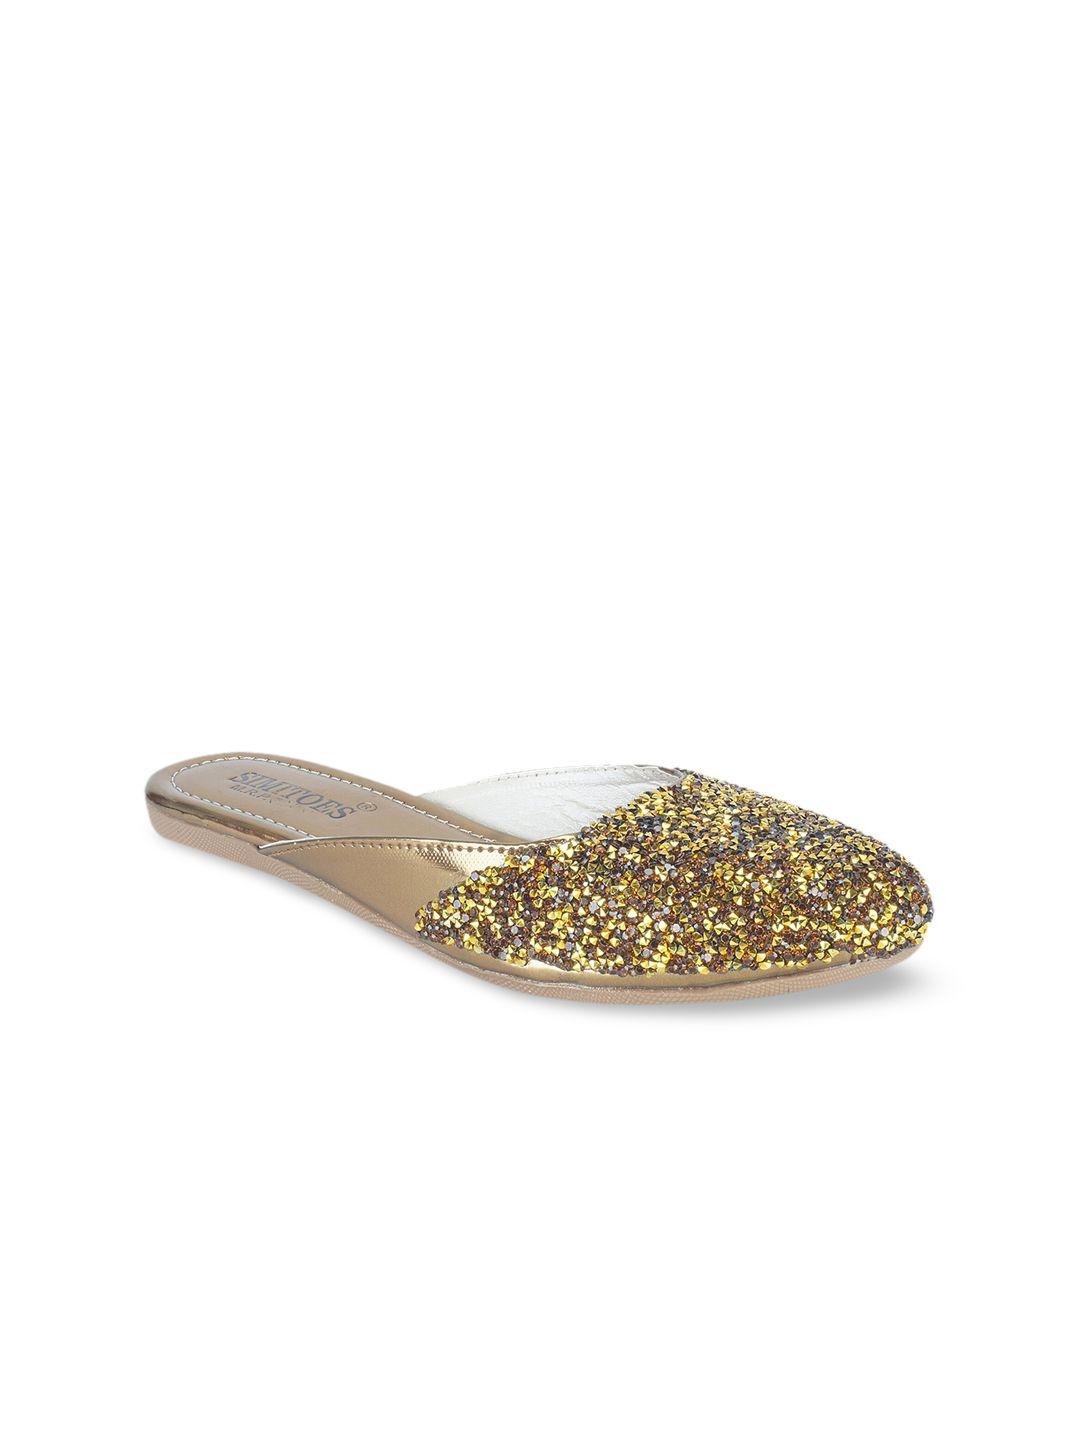 the-desi-dulhan-women-gold-toned-embellished-party-mules-flats